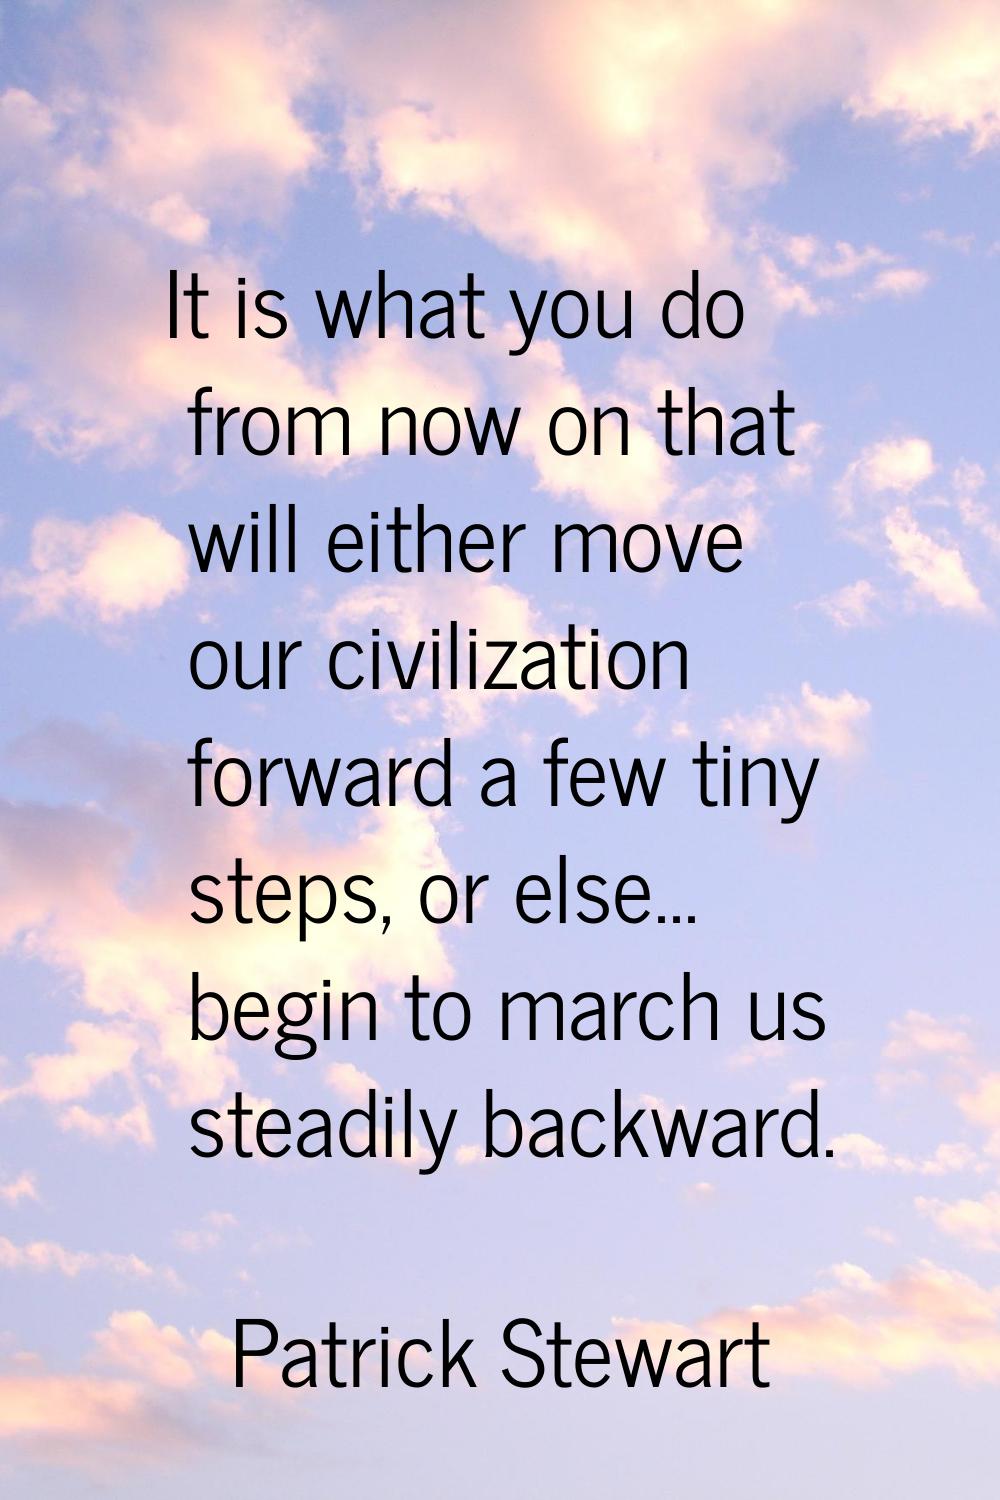 It is what you do from now on that will either move our civilization forward a few tiny steps, or e